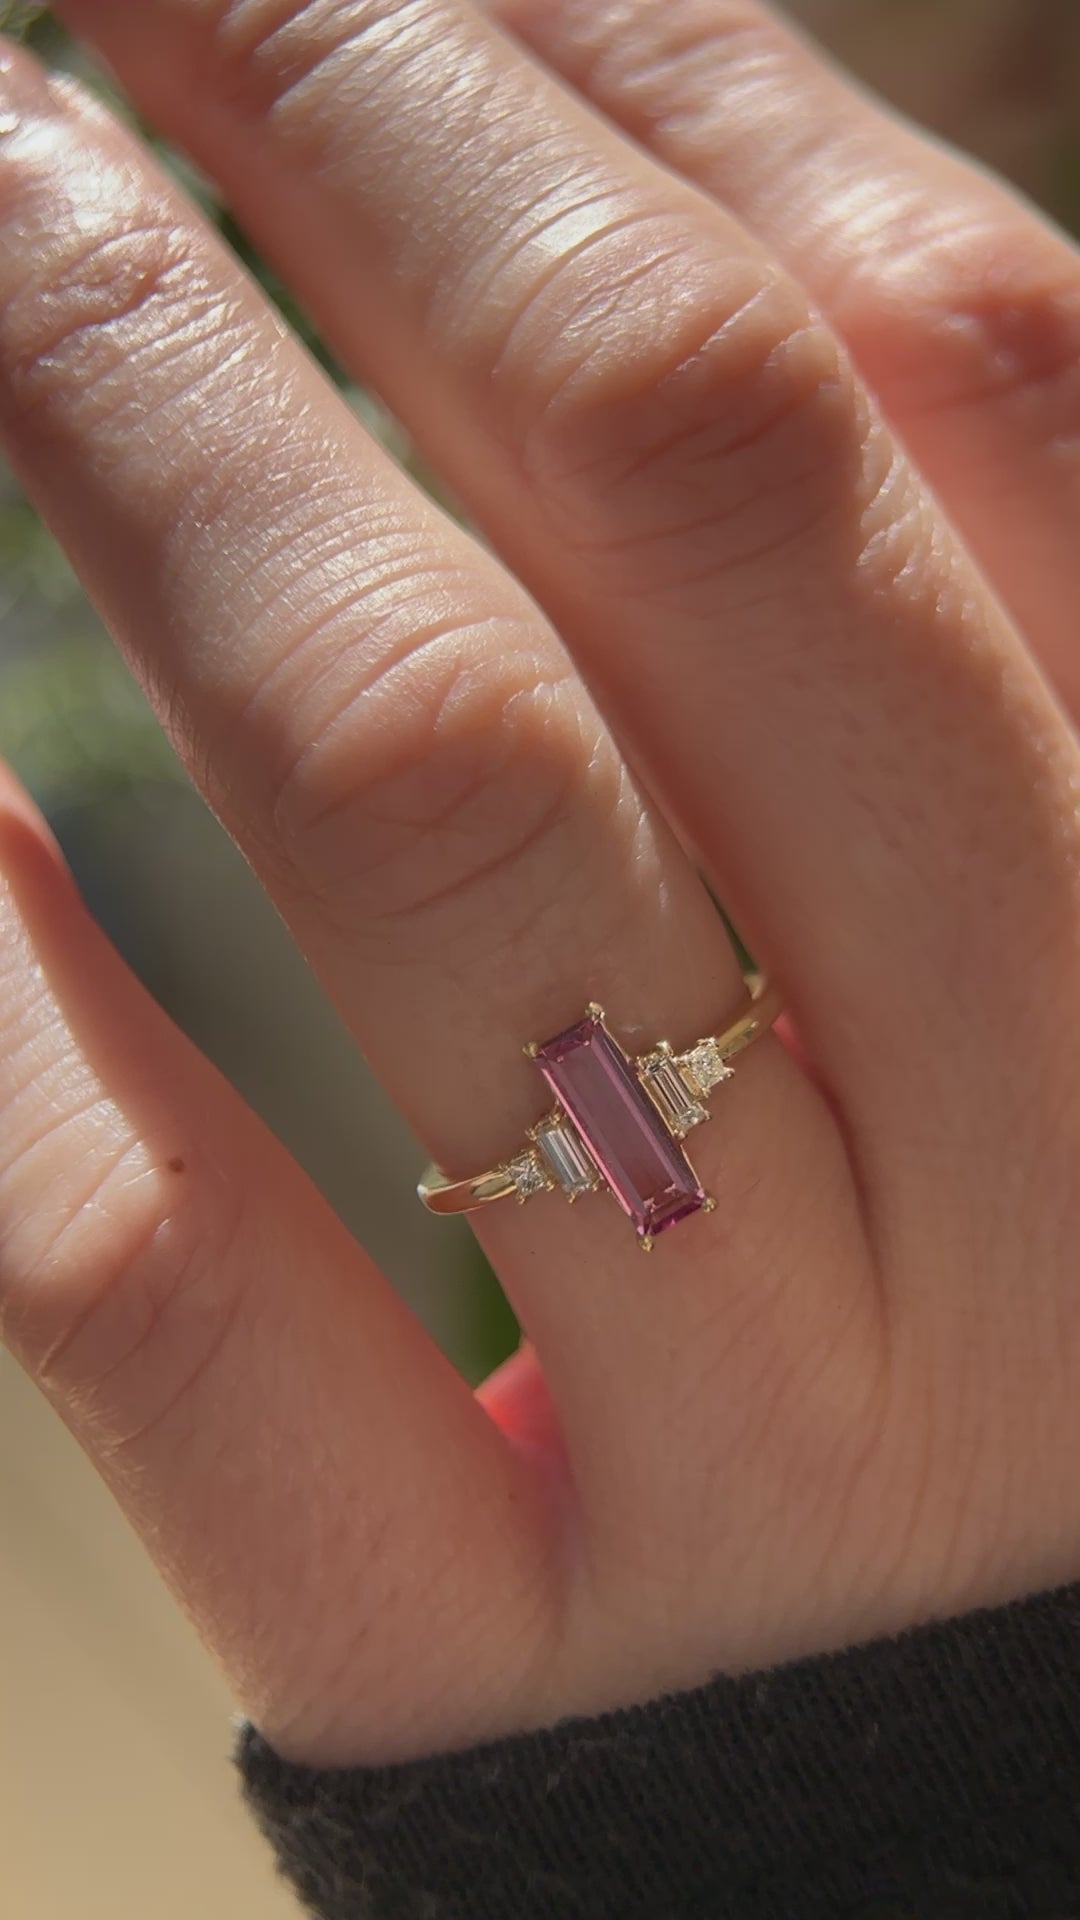 The Mira 0.74 CT Pink Baguette Sapphire Ring